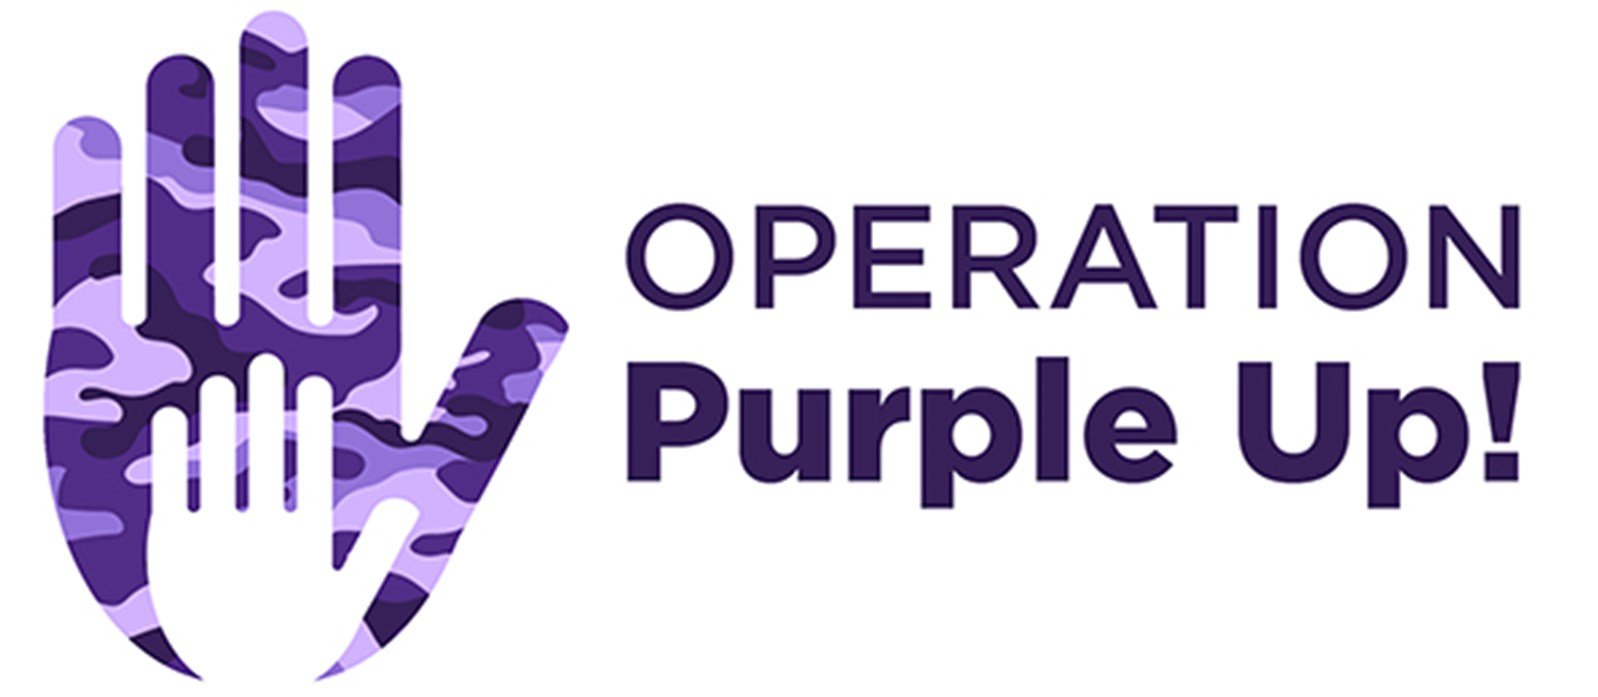 Leonardo DRS Hosts a “Purple Up” Day for Military Children